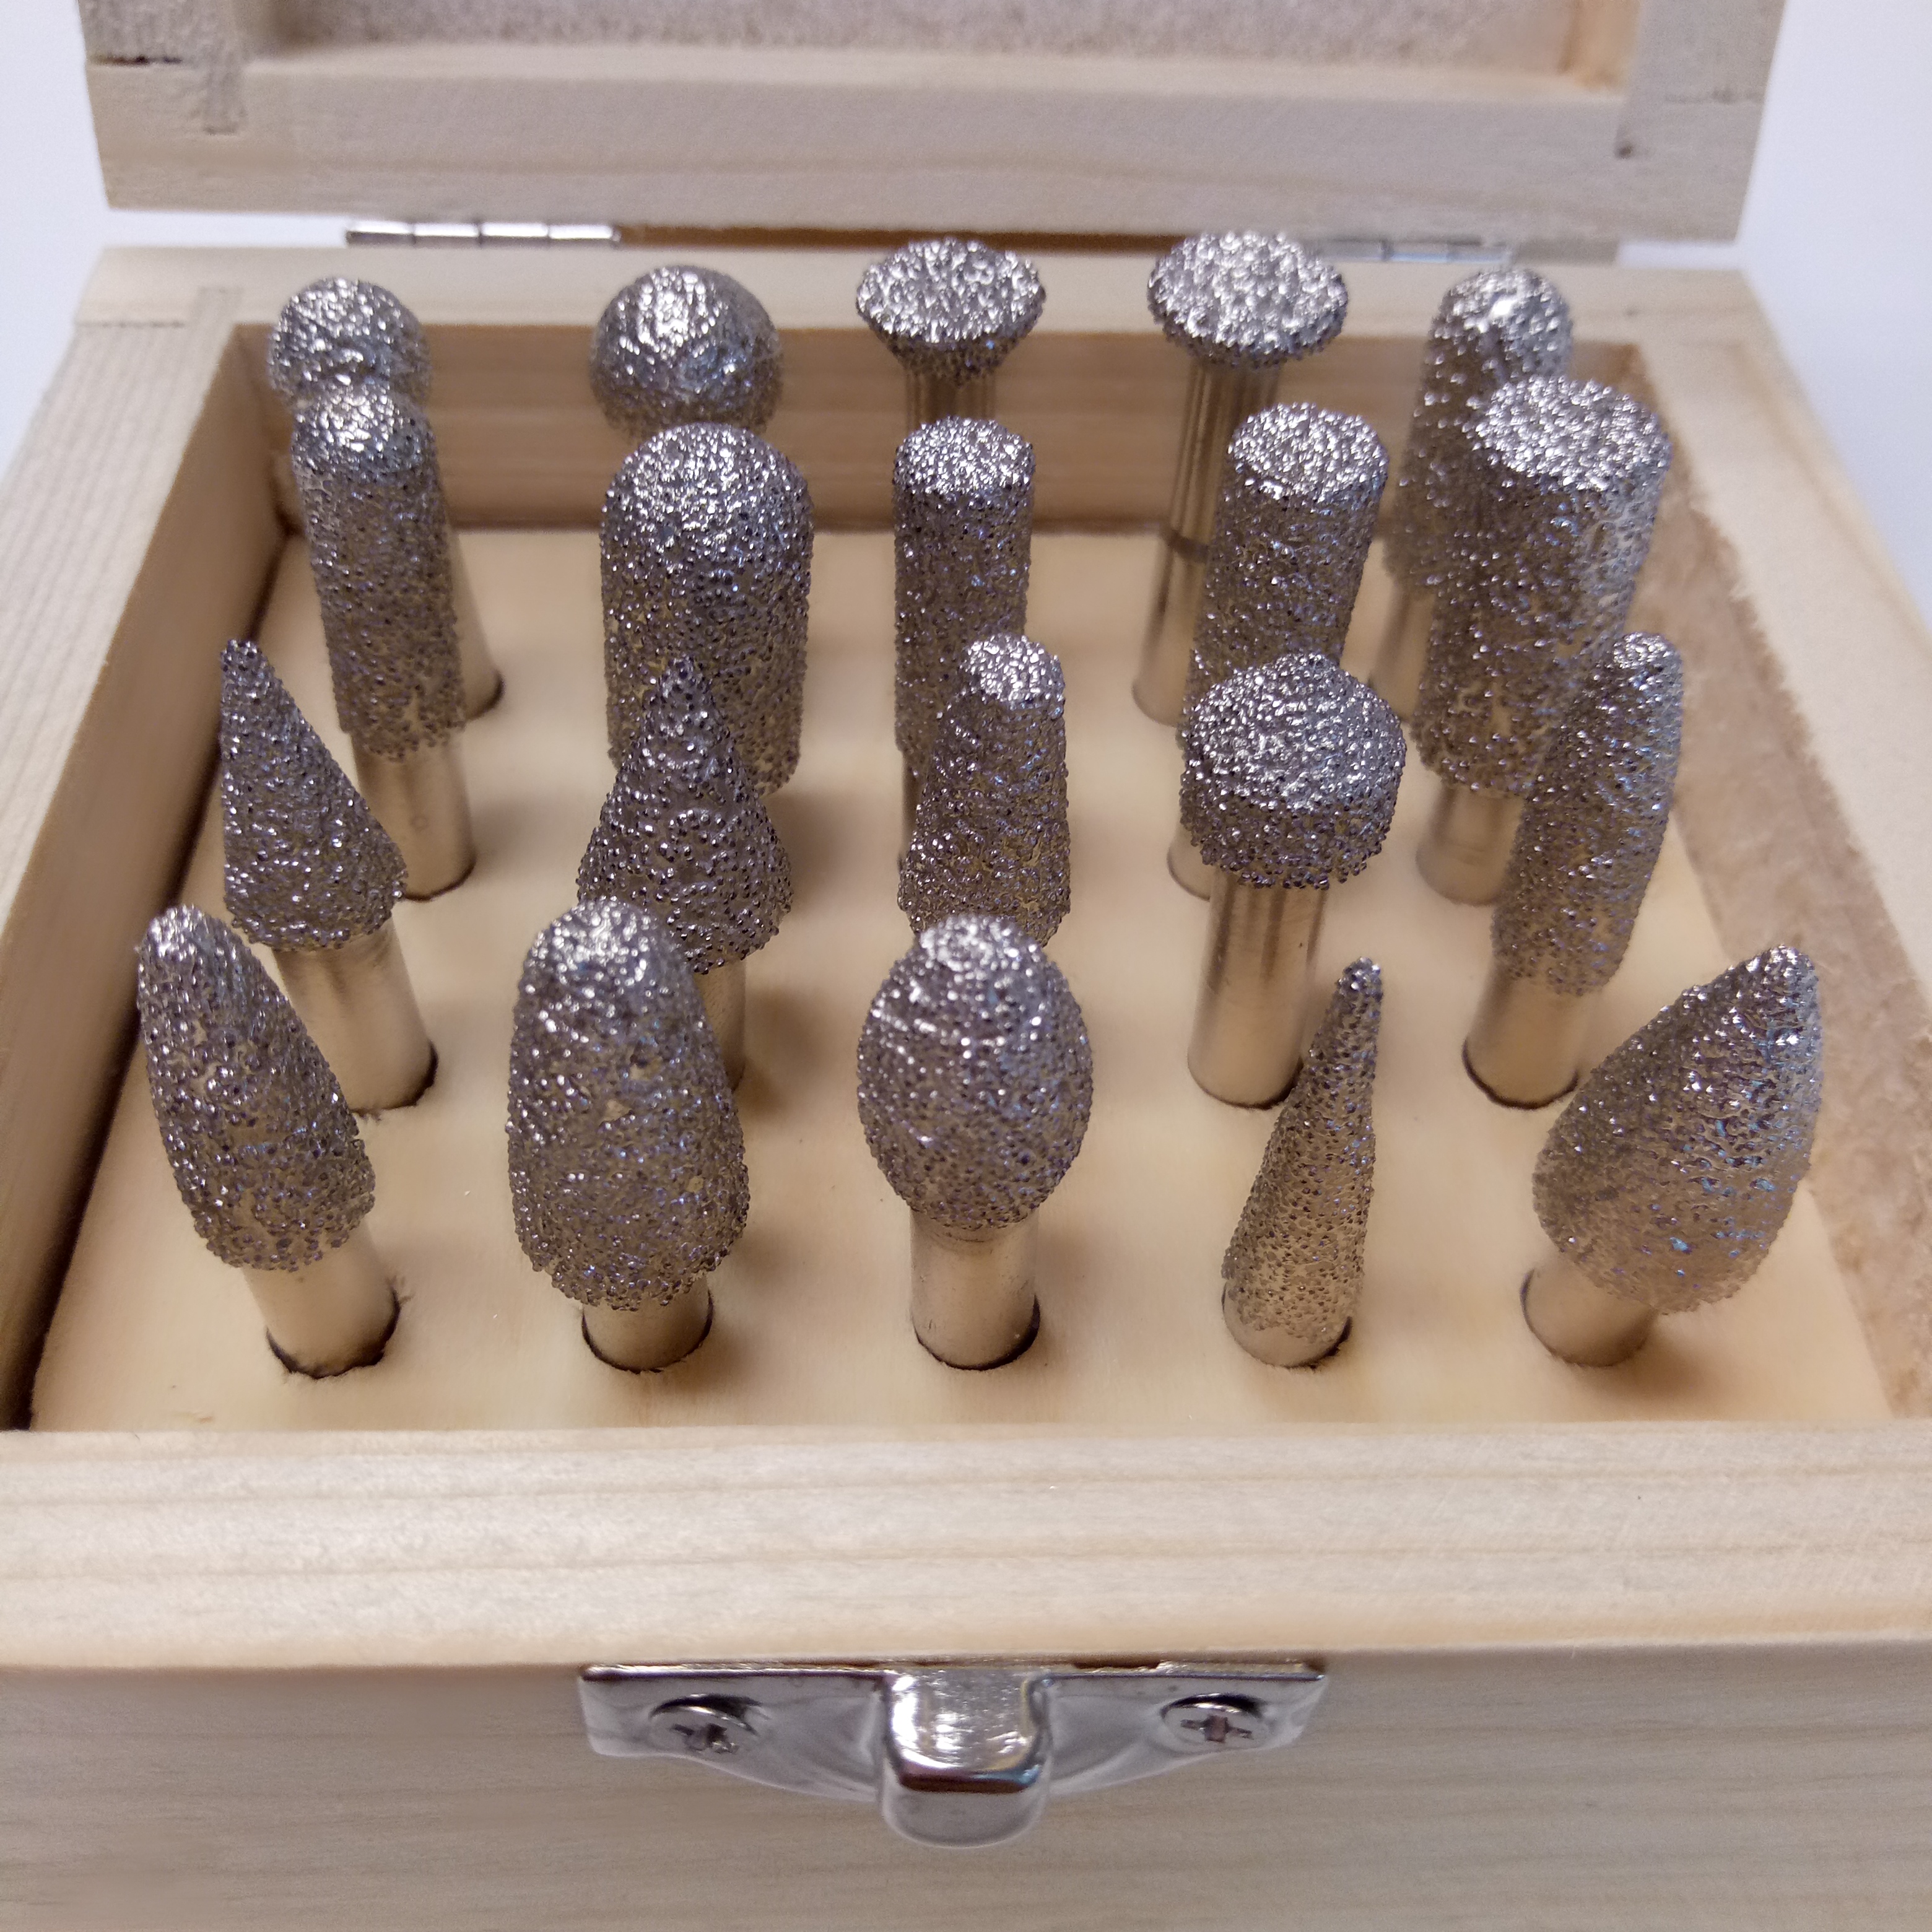 20 Pcs Stone Carving Power Tools Vacuum Brazed Diamond Mounted Points Set for Granite Marble